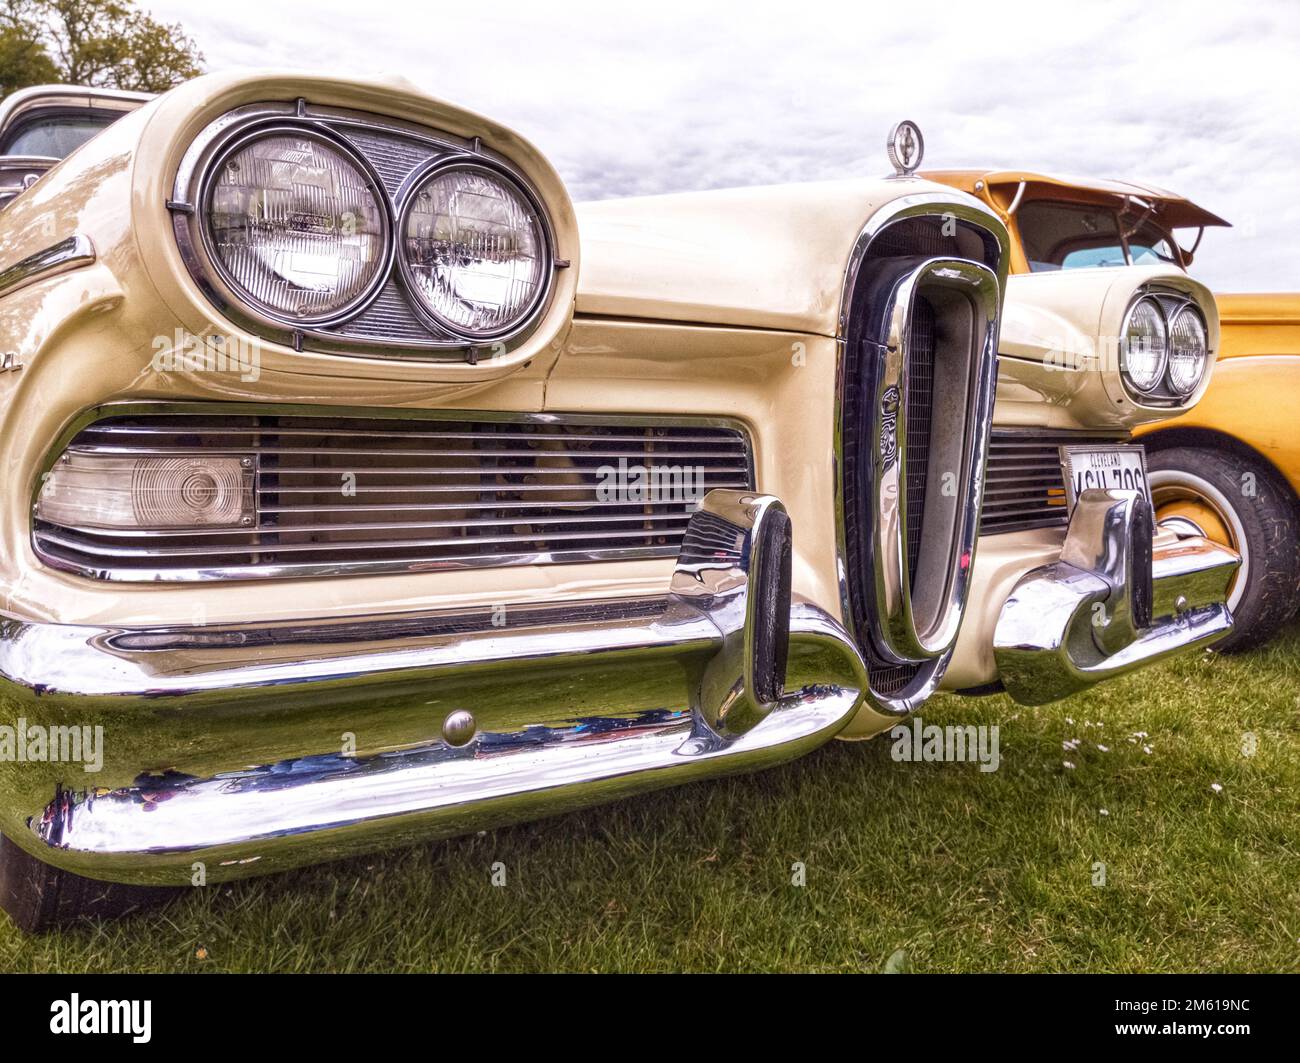 Swansea, UK - May 2, 2022: Singleton Park vintage car Show, Front of a Ford Edsel. Stock Photo